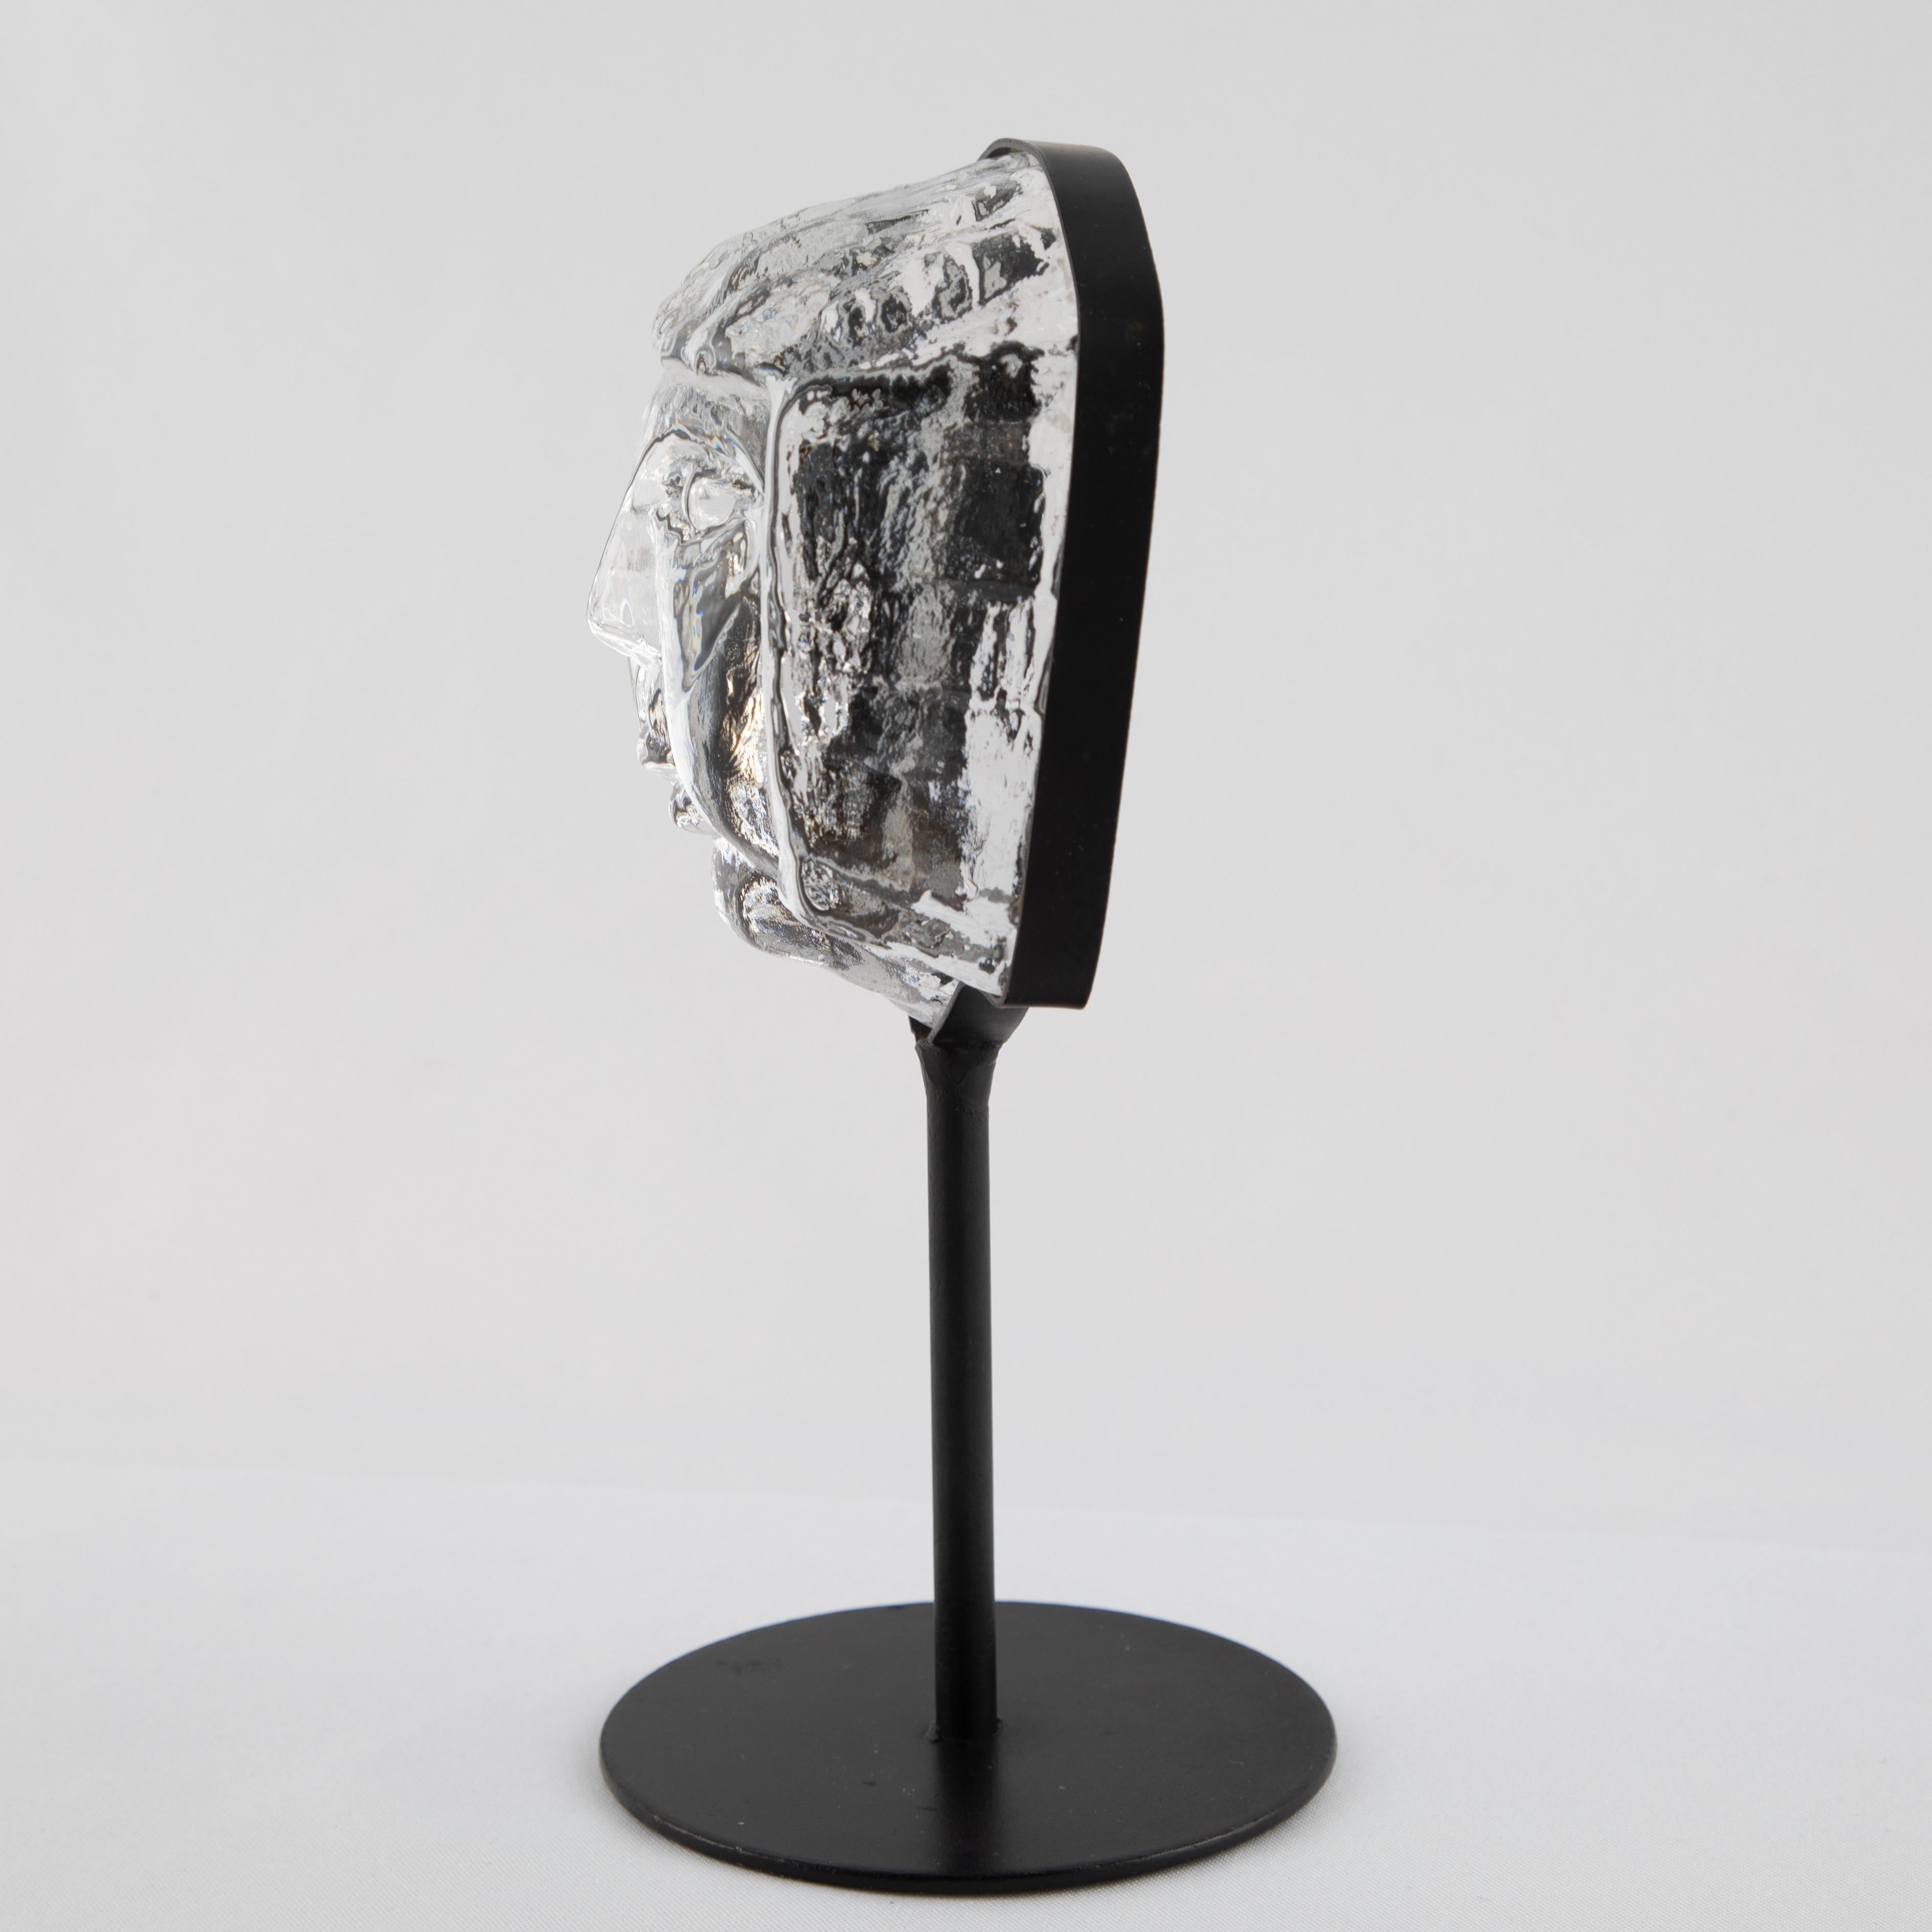 Mid-20th Century Glass Face Sculpture on Iron Stand by Erik Hoglund for Kosta Boda, circa 1960s For Sale